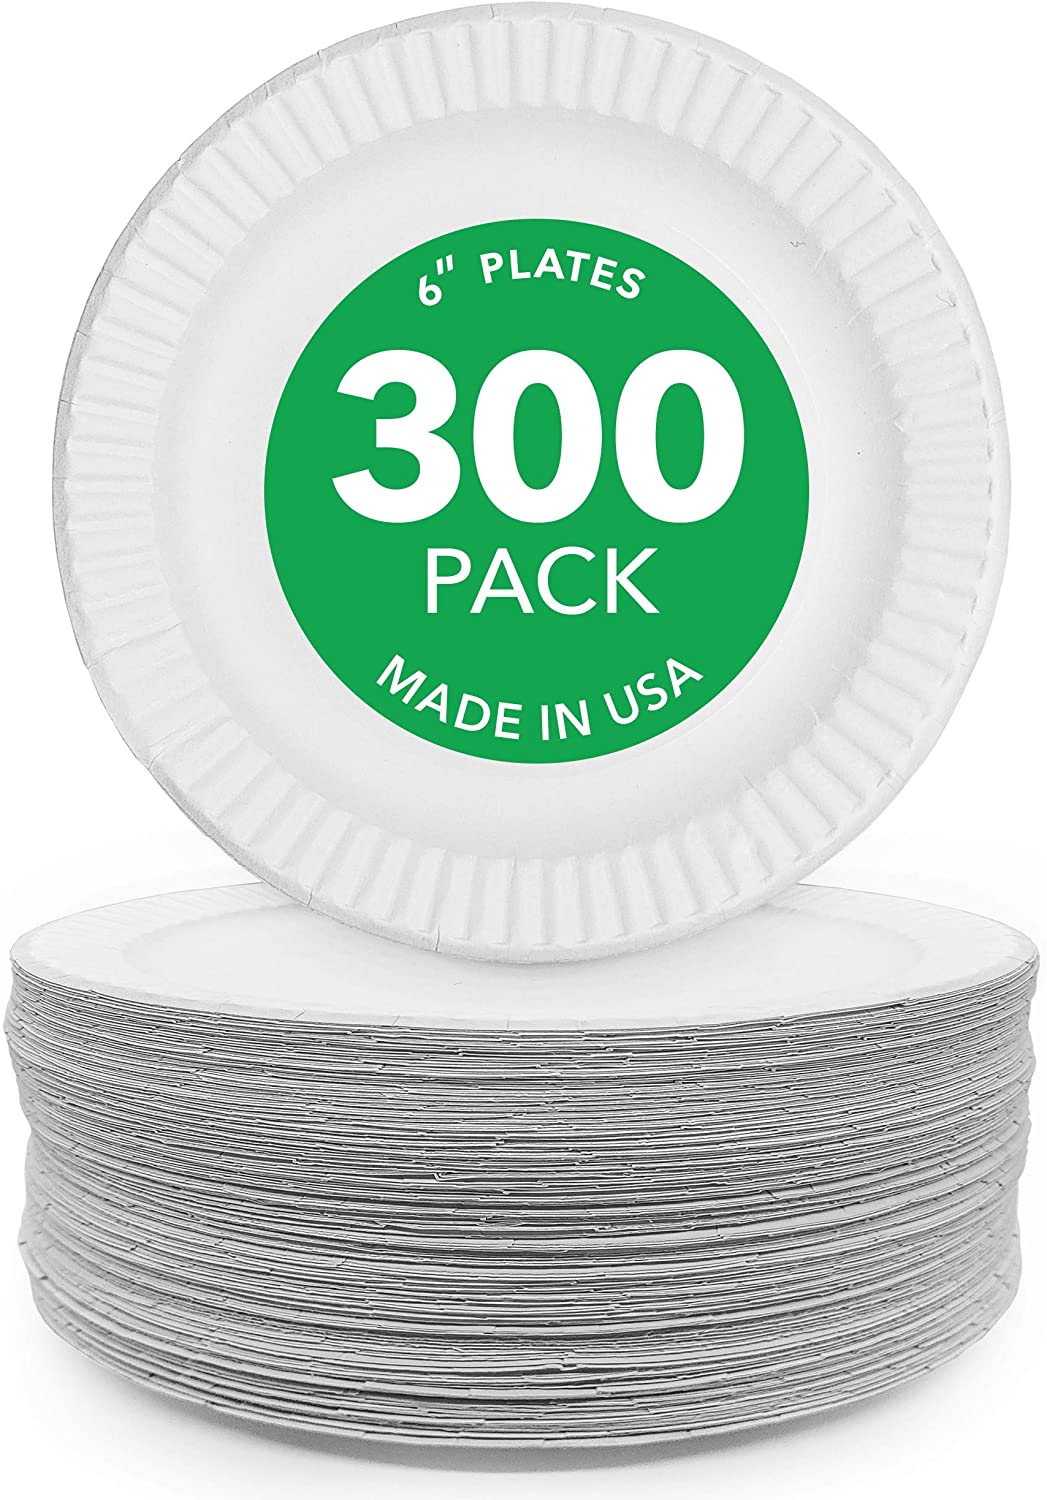 9 Uncoated Paper Plates in Bulk (1000 Count)